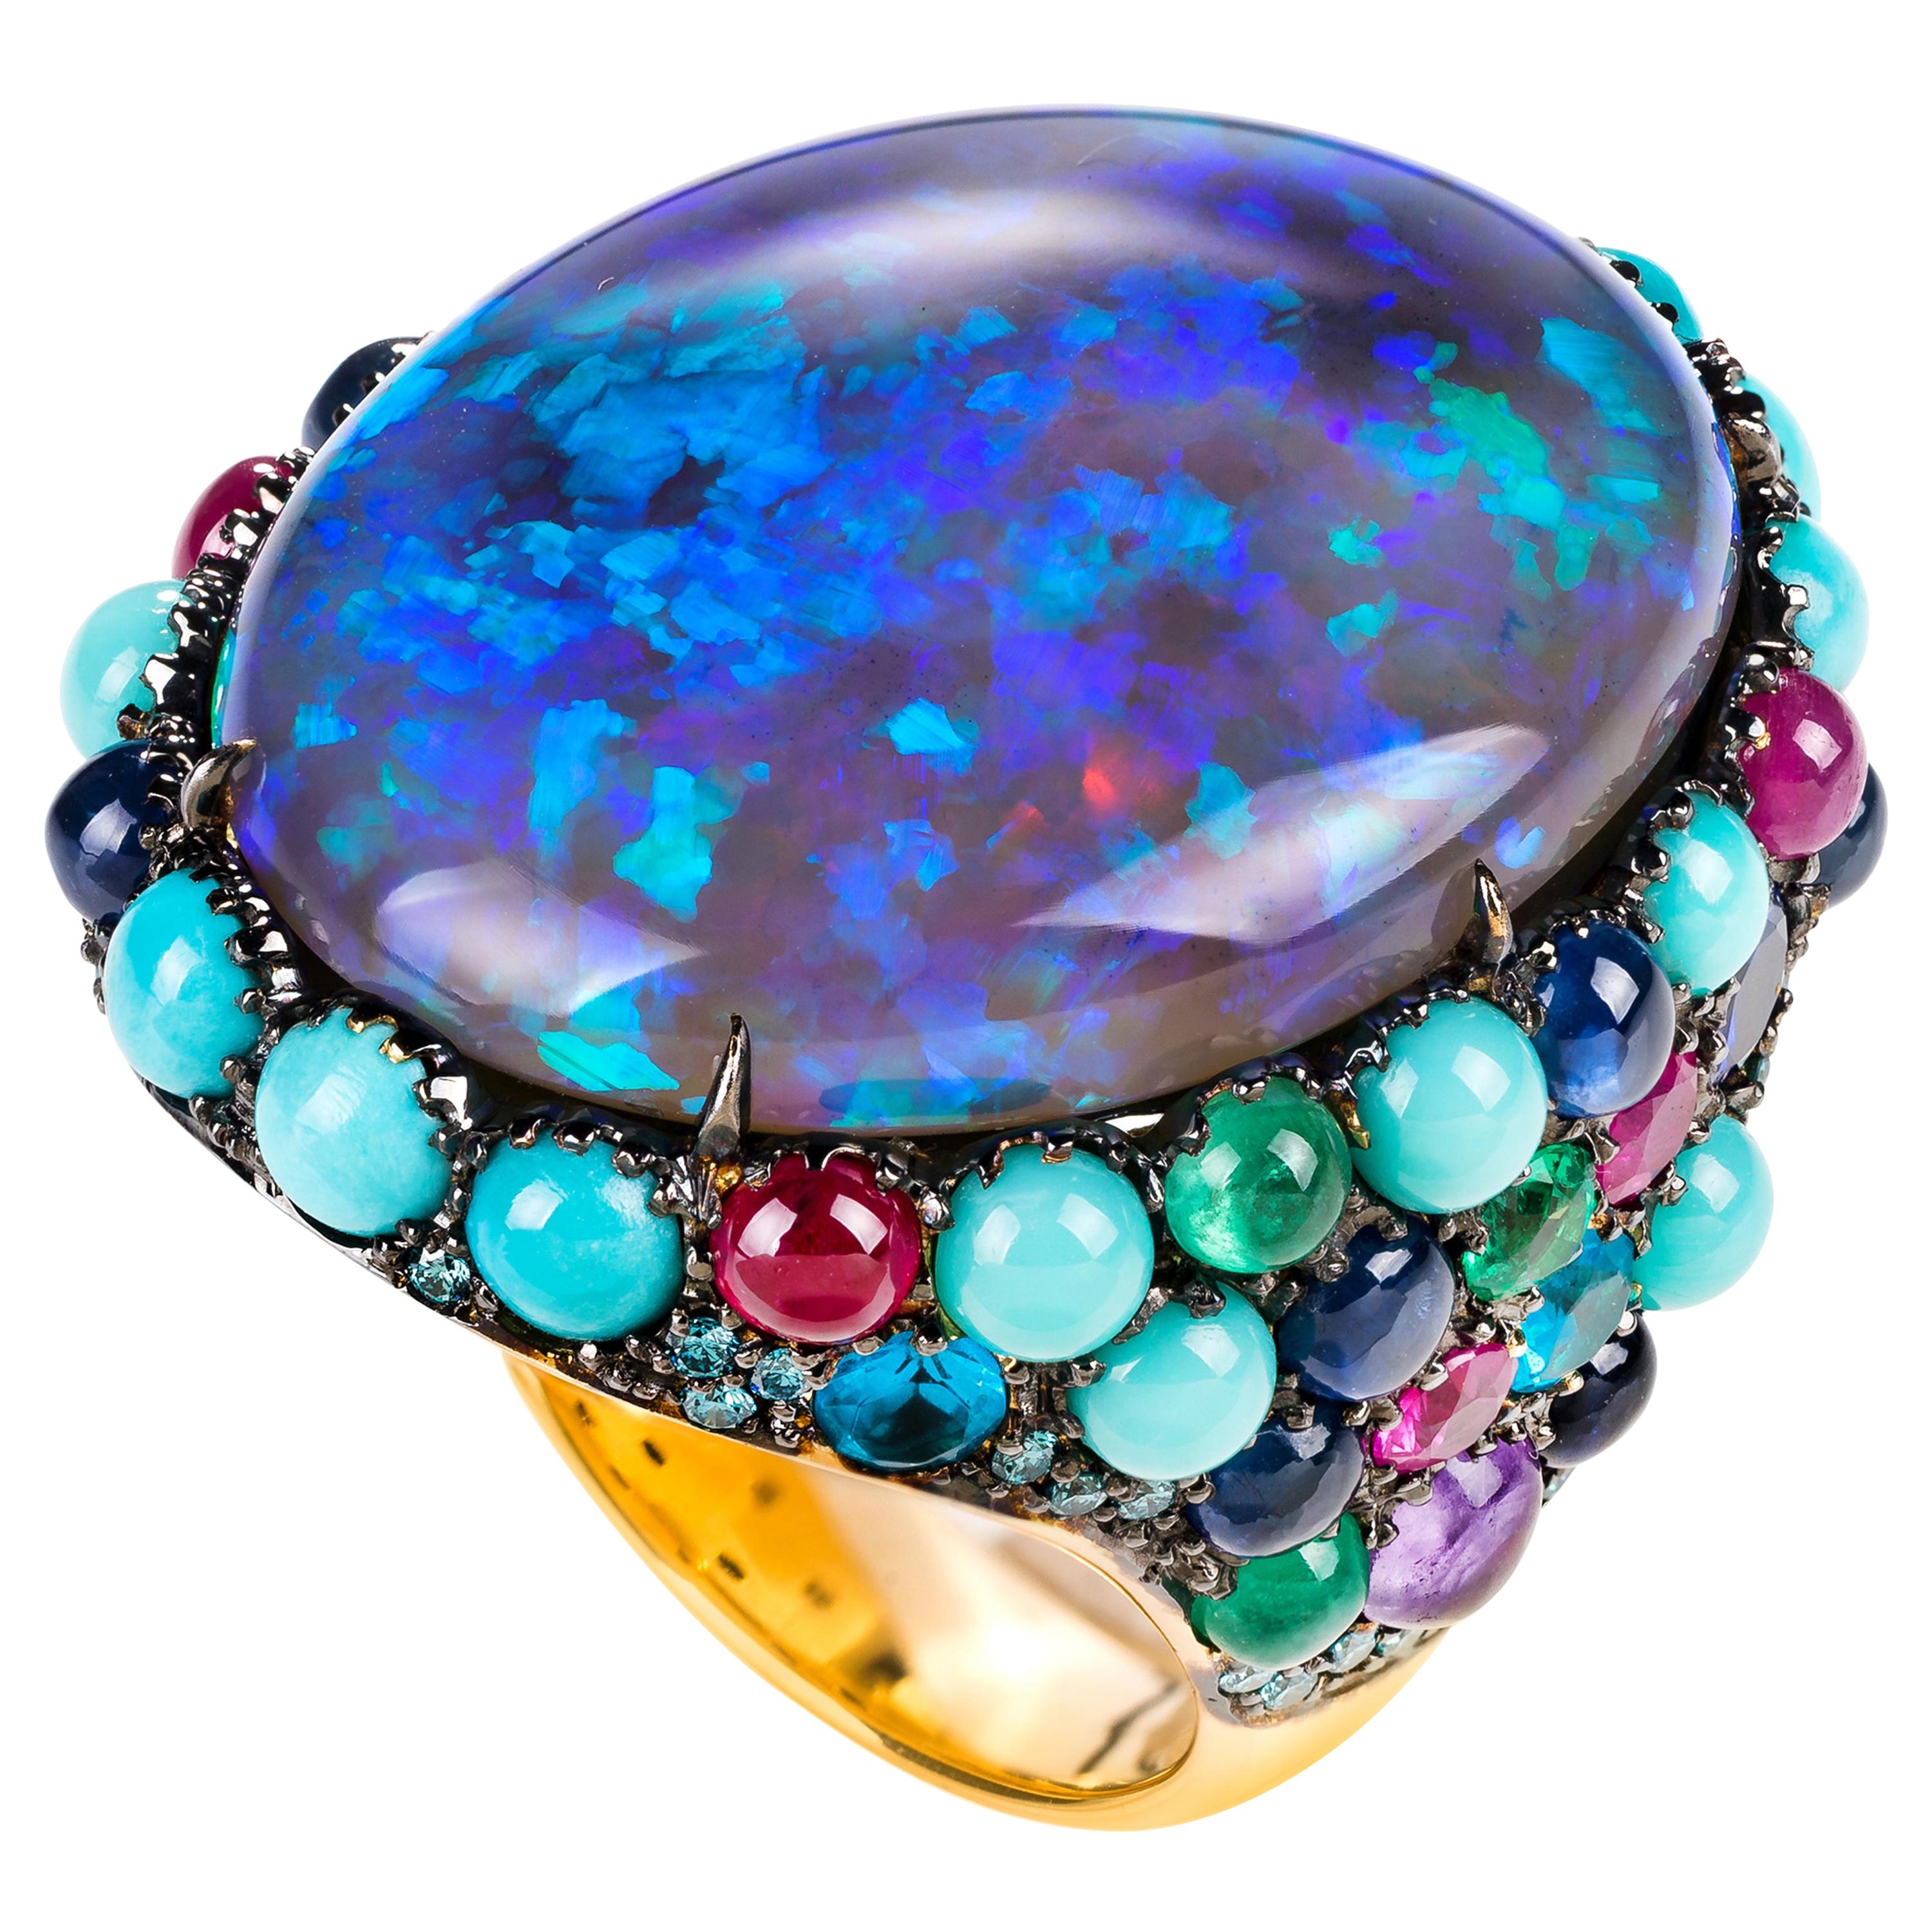 Oval "Lightning ridge" Black Opal Cocktail Ring in Yellow Gold